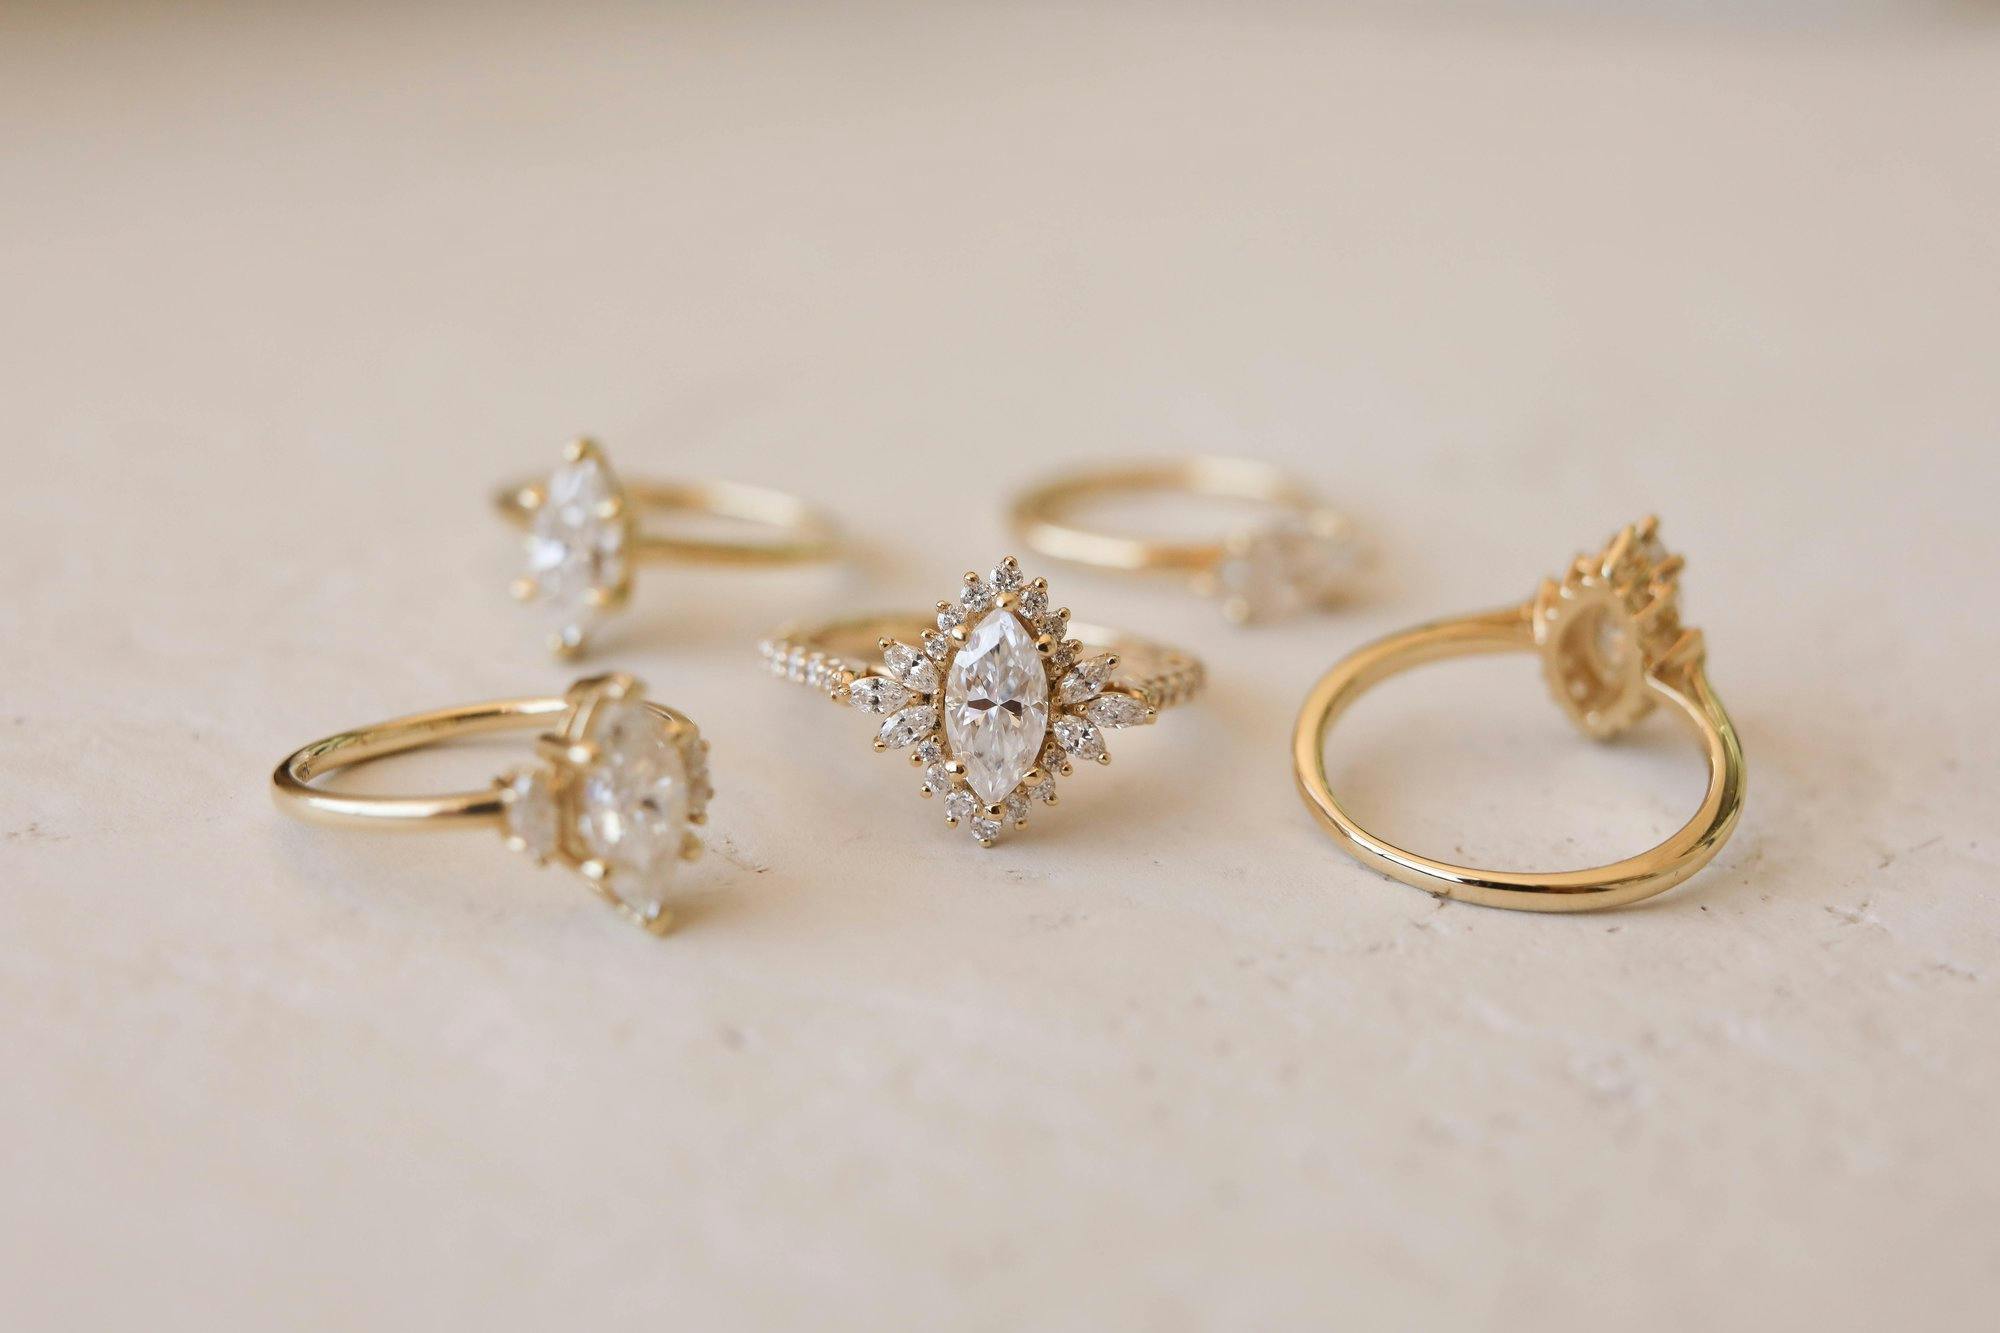 group photo of yellow gold, marquise, engagement rings with moissanite center stones